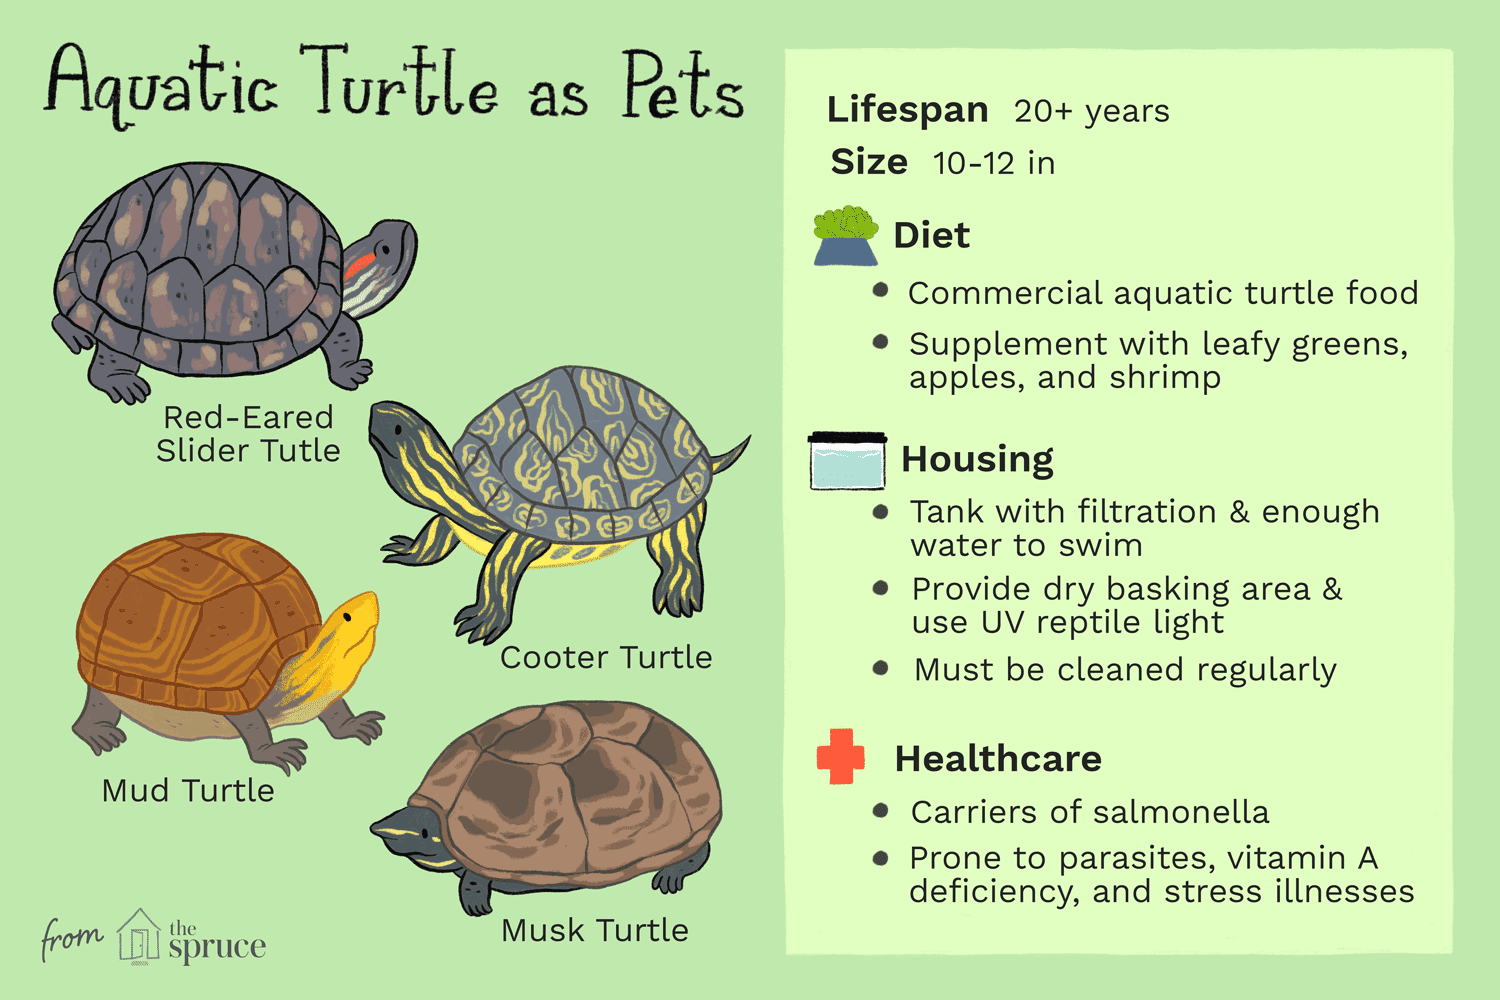 Are Pet Turtles Easy to Take Care of